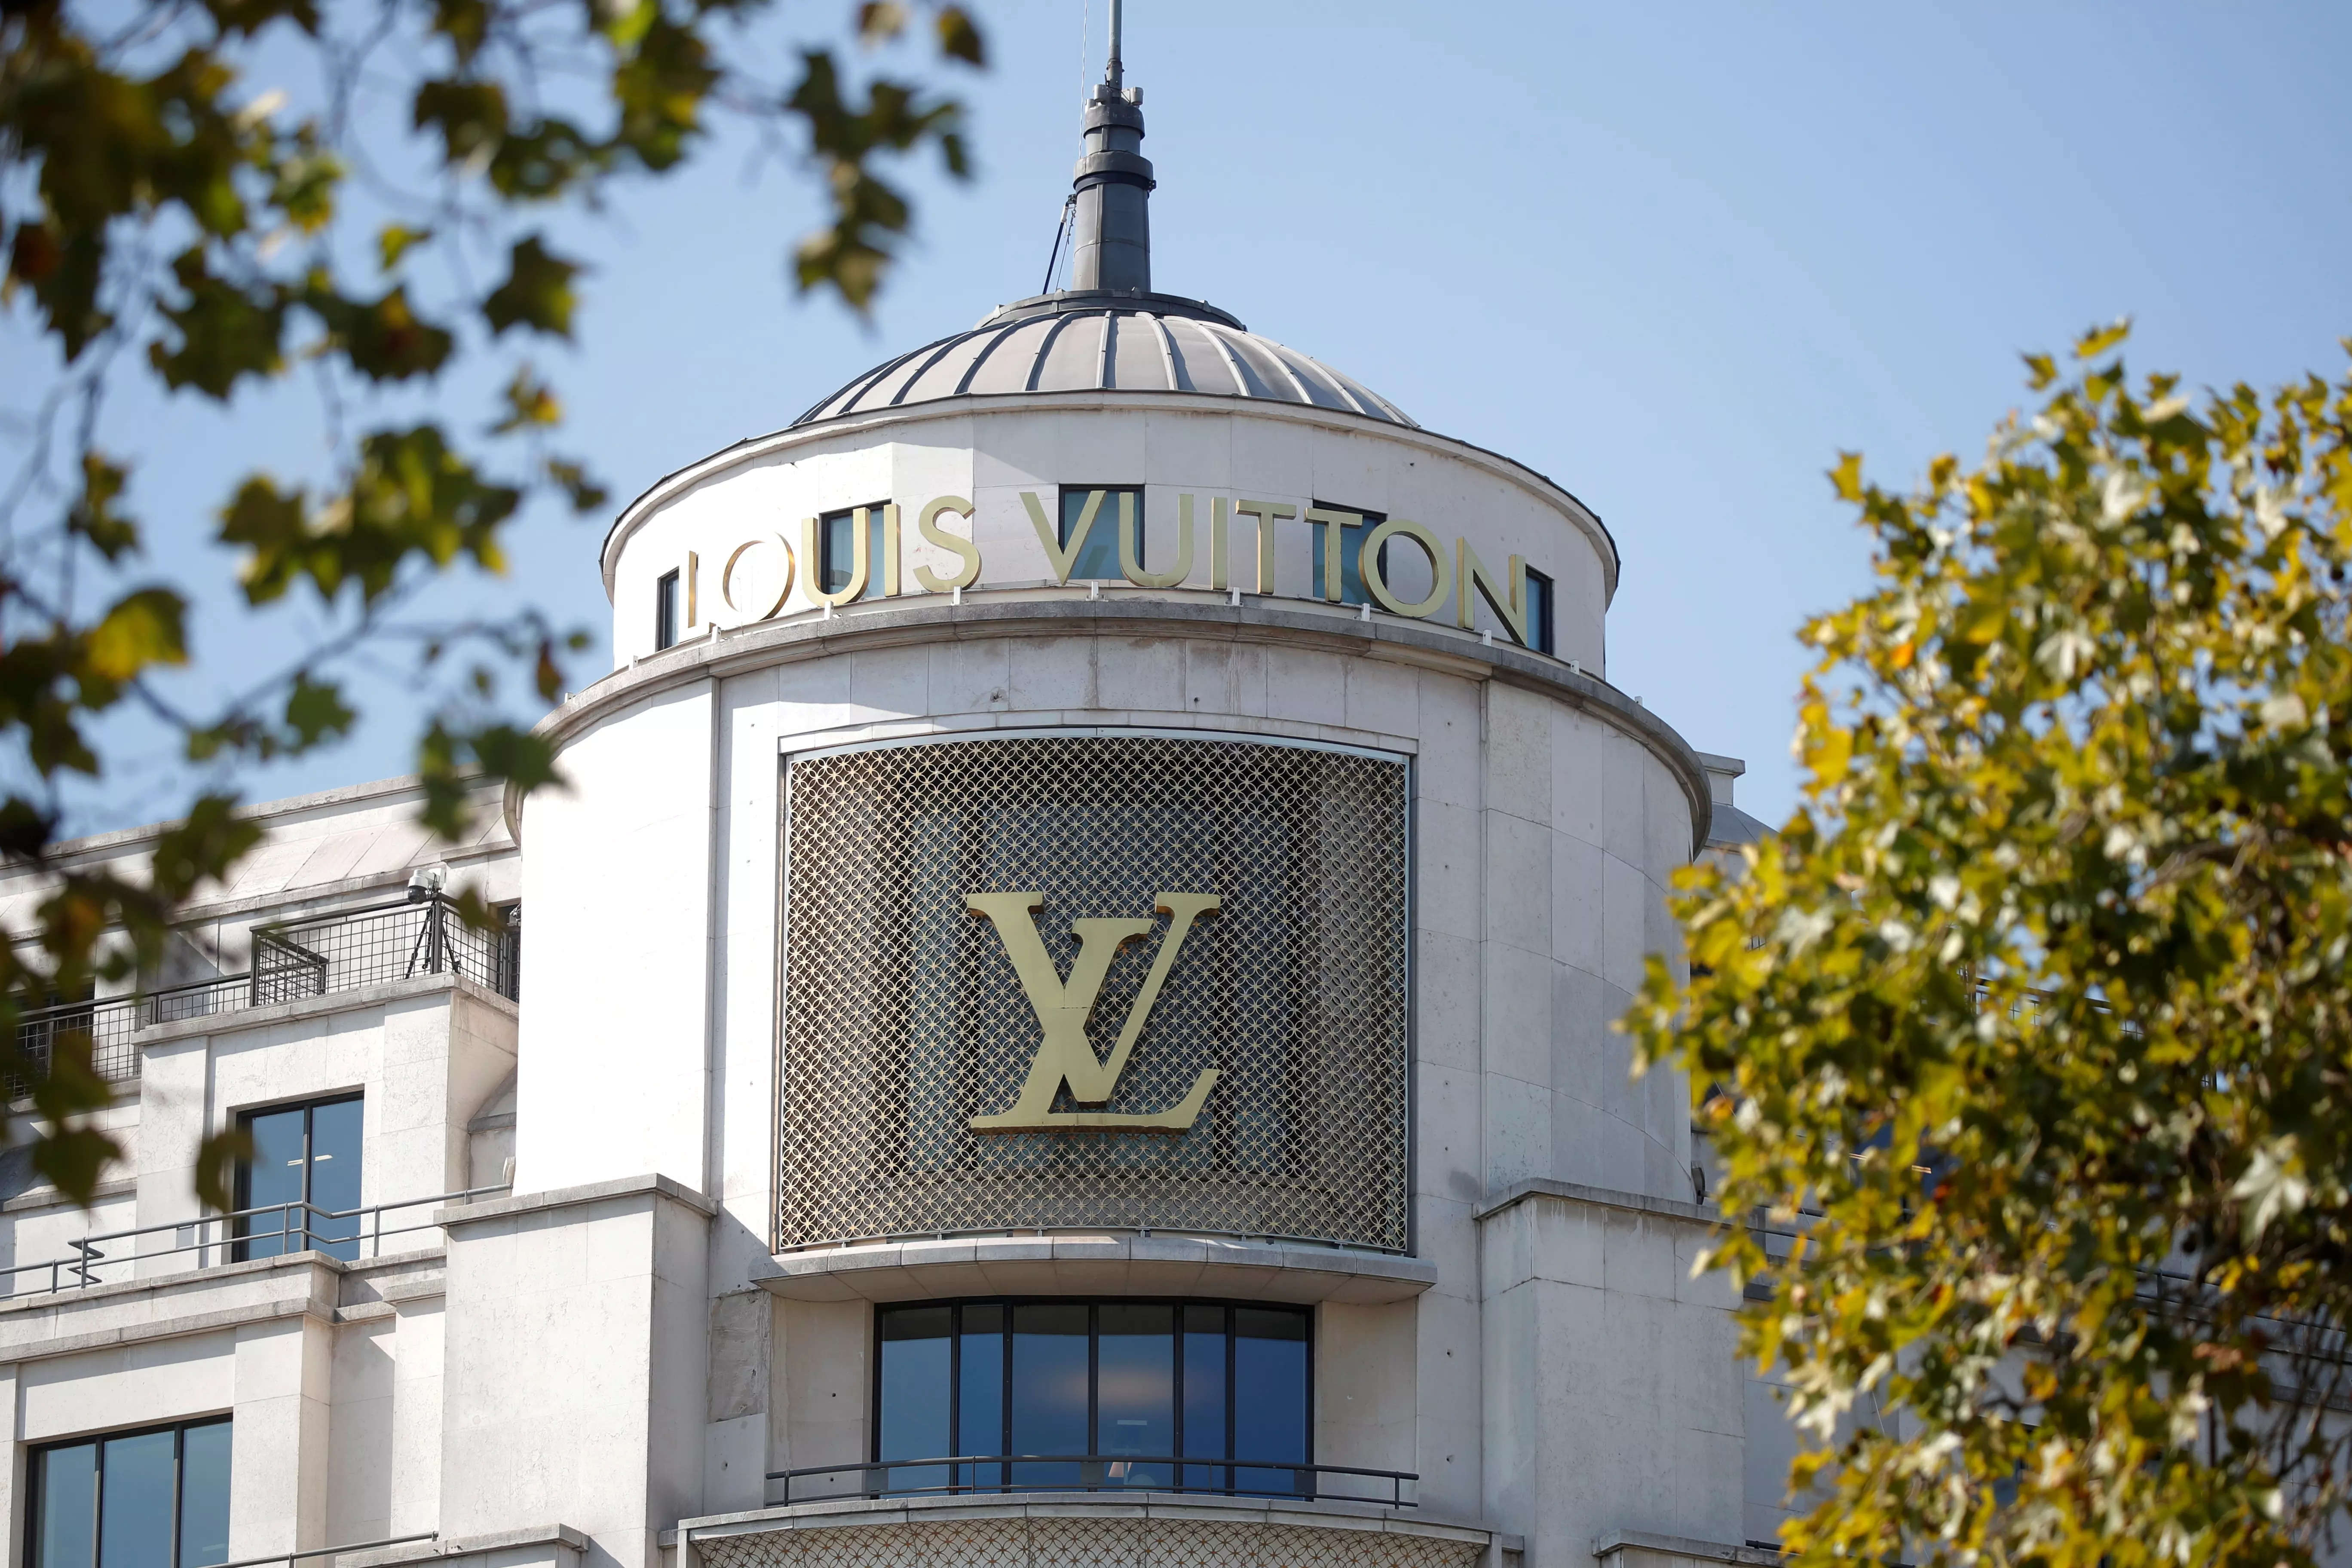 LVMH acquires Platinum Invest to ramp up Tiffany's production capacity